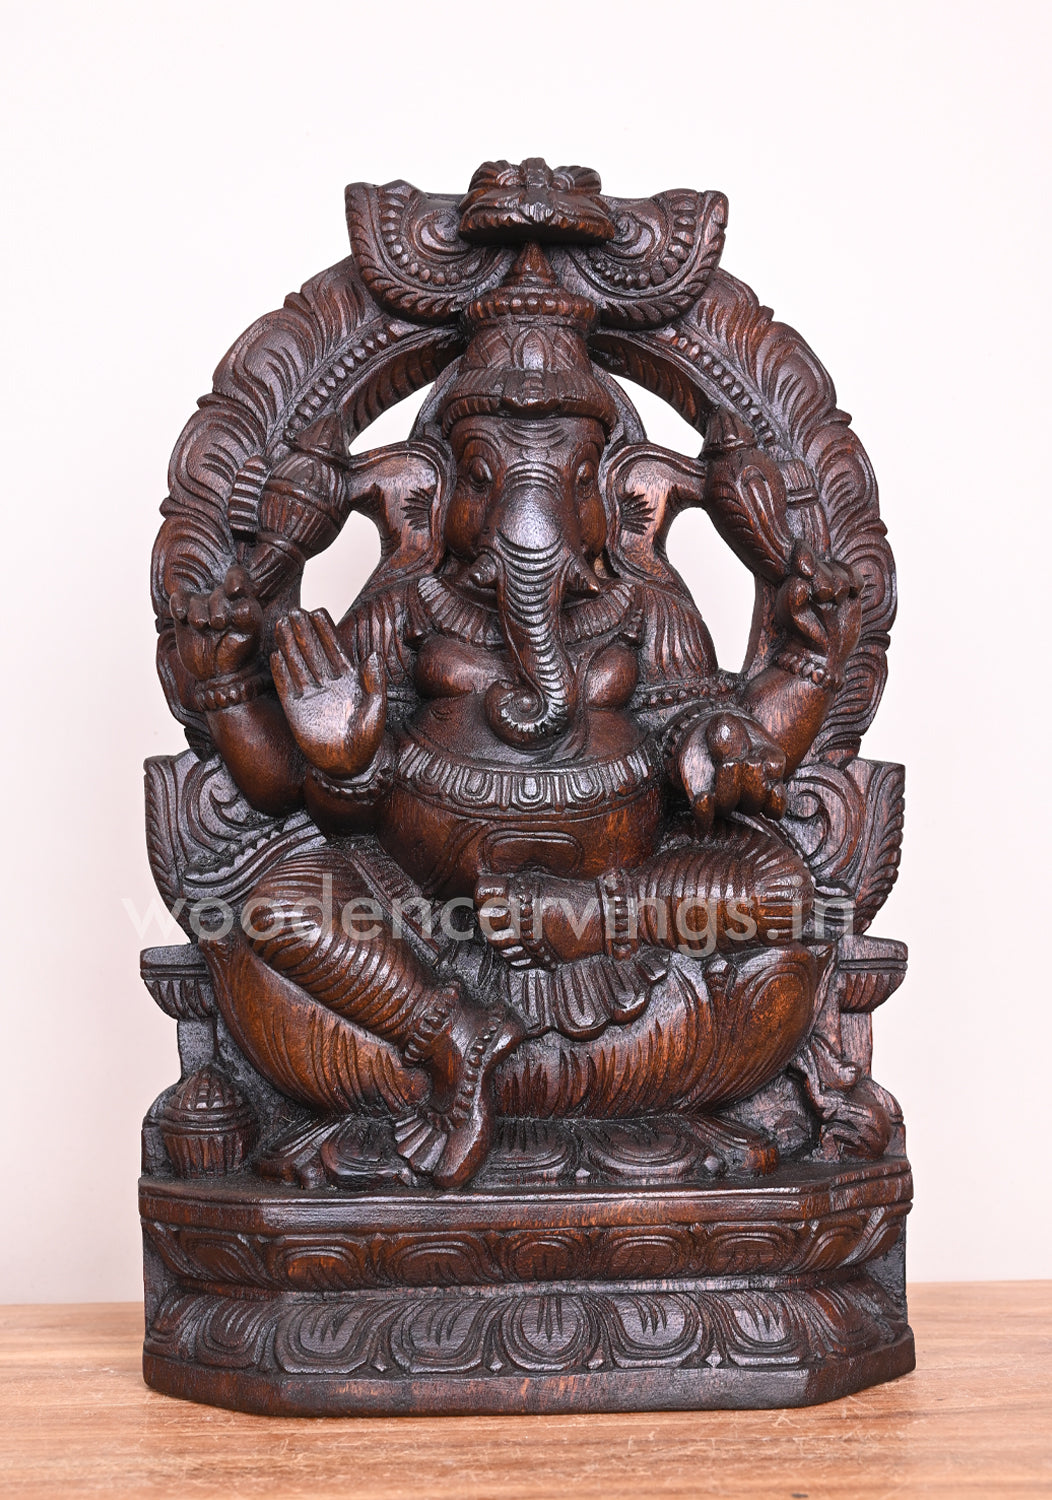 Handmade Art of Arch Ganesha on Lotus and Blessing People in Mudra Abhaya Wooden Sculpture 17"